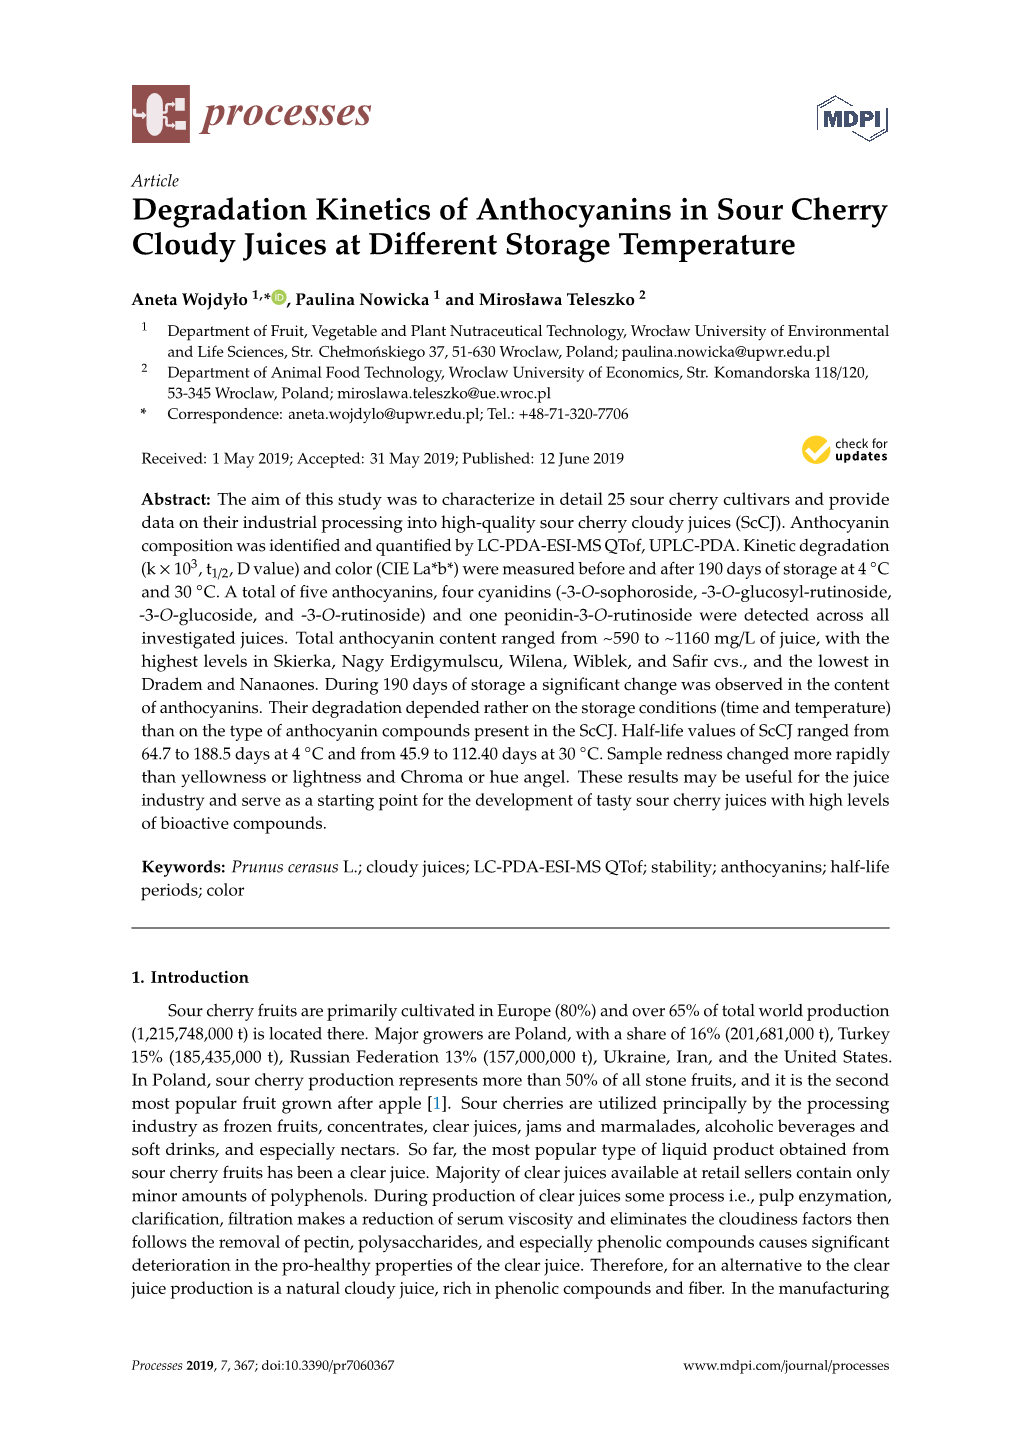 Degradation Kinetics of Anthocyanins in Sour Cherry Cloudy Juices at Diﬀerent Storage Temperature